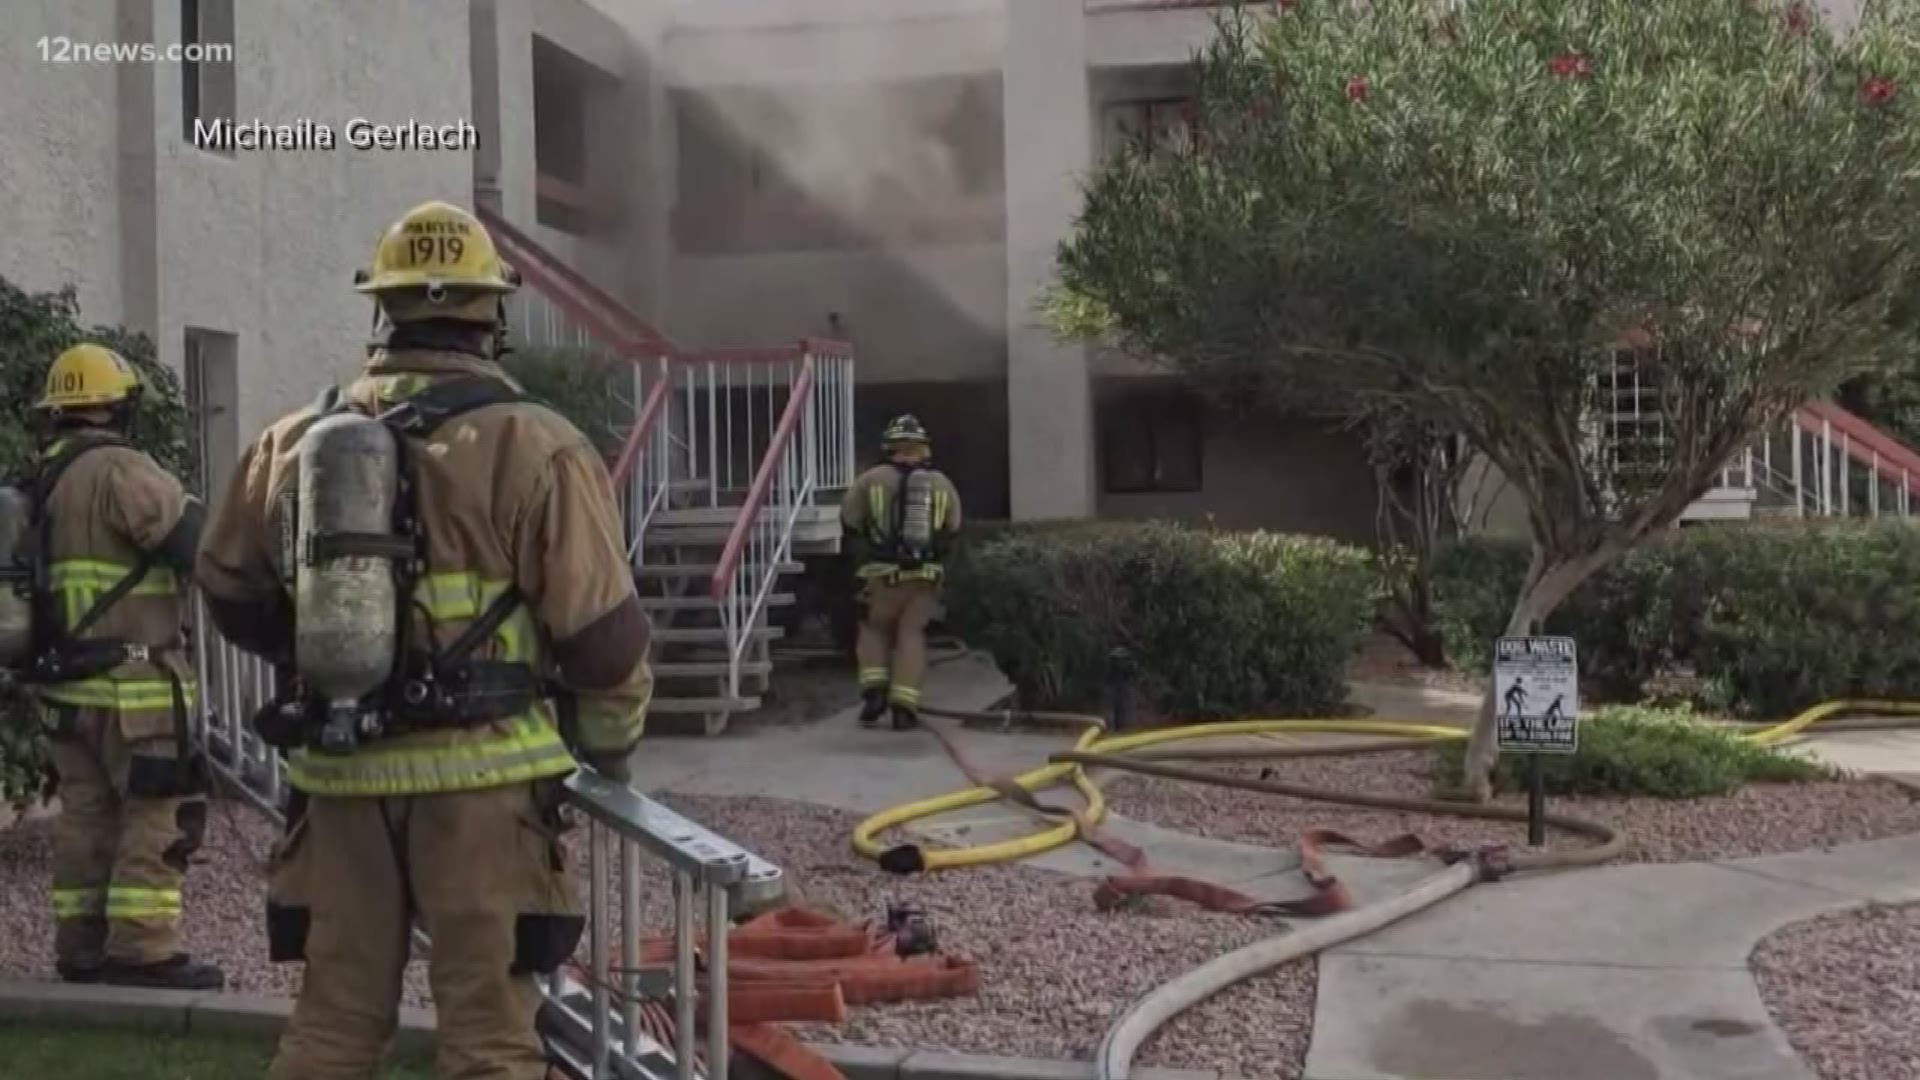 The woman was pronounced dead after a fire broke out at her Phoenix apartment. Team 12's Colleen Sikora has the latest.